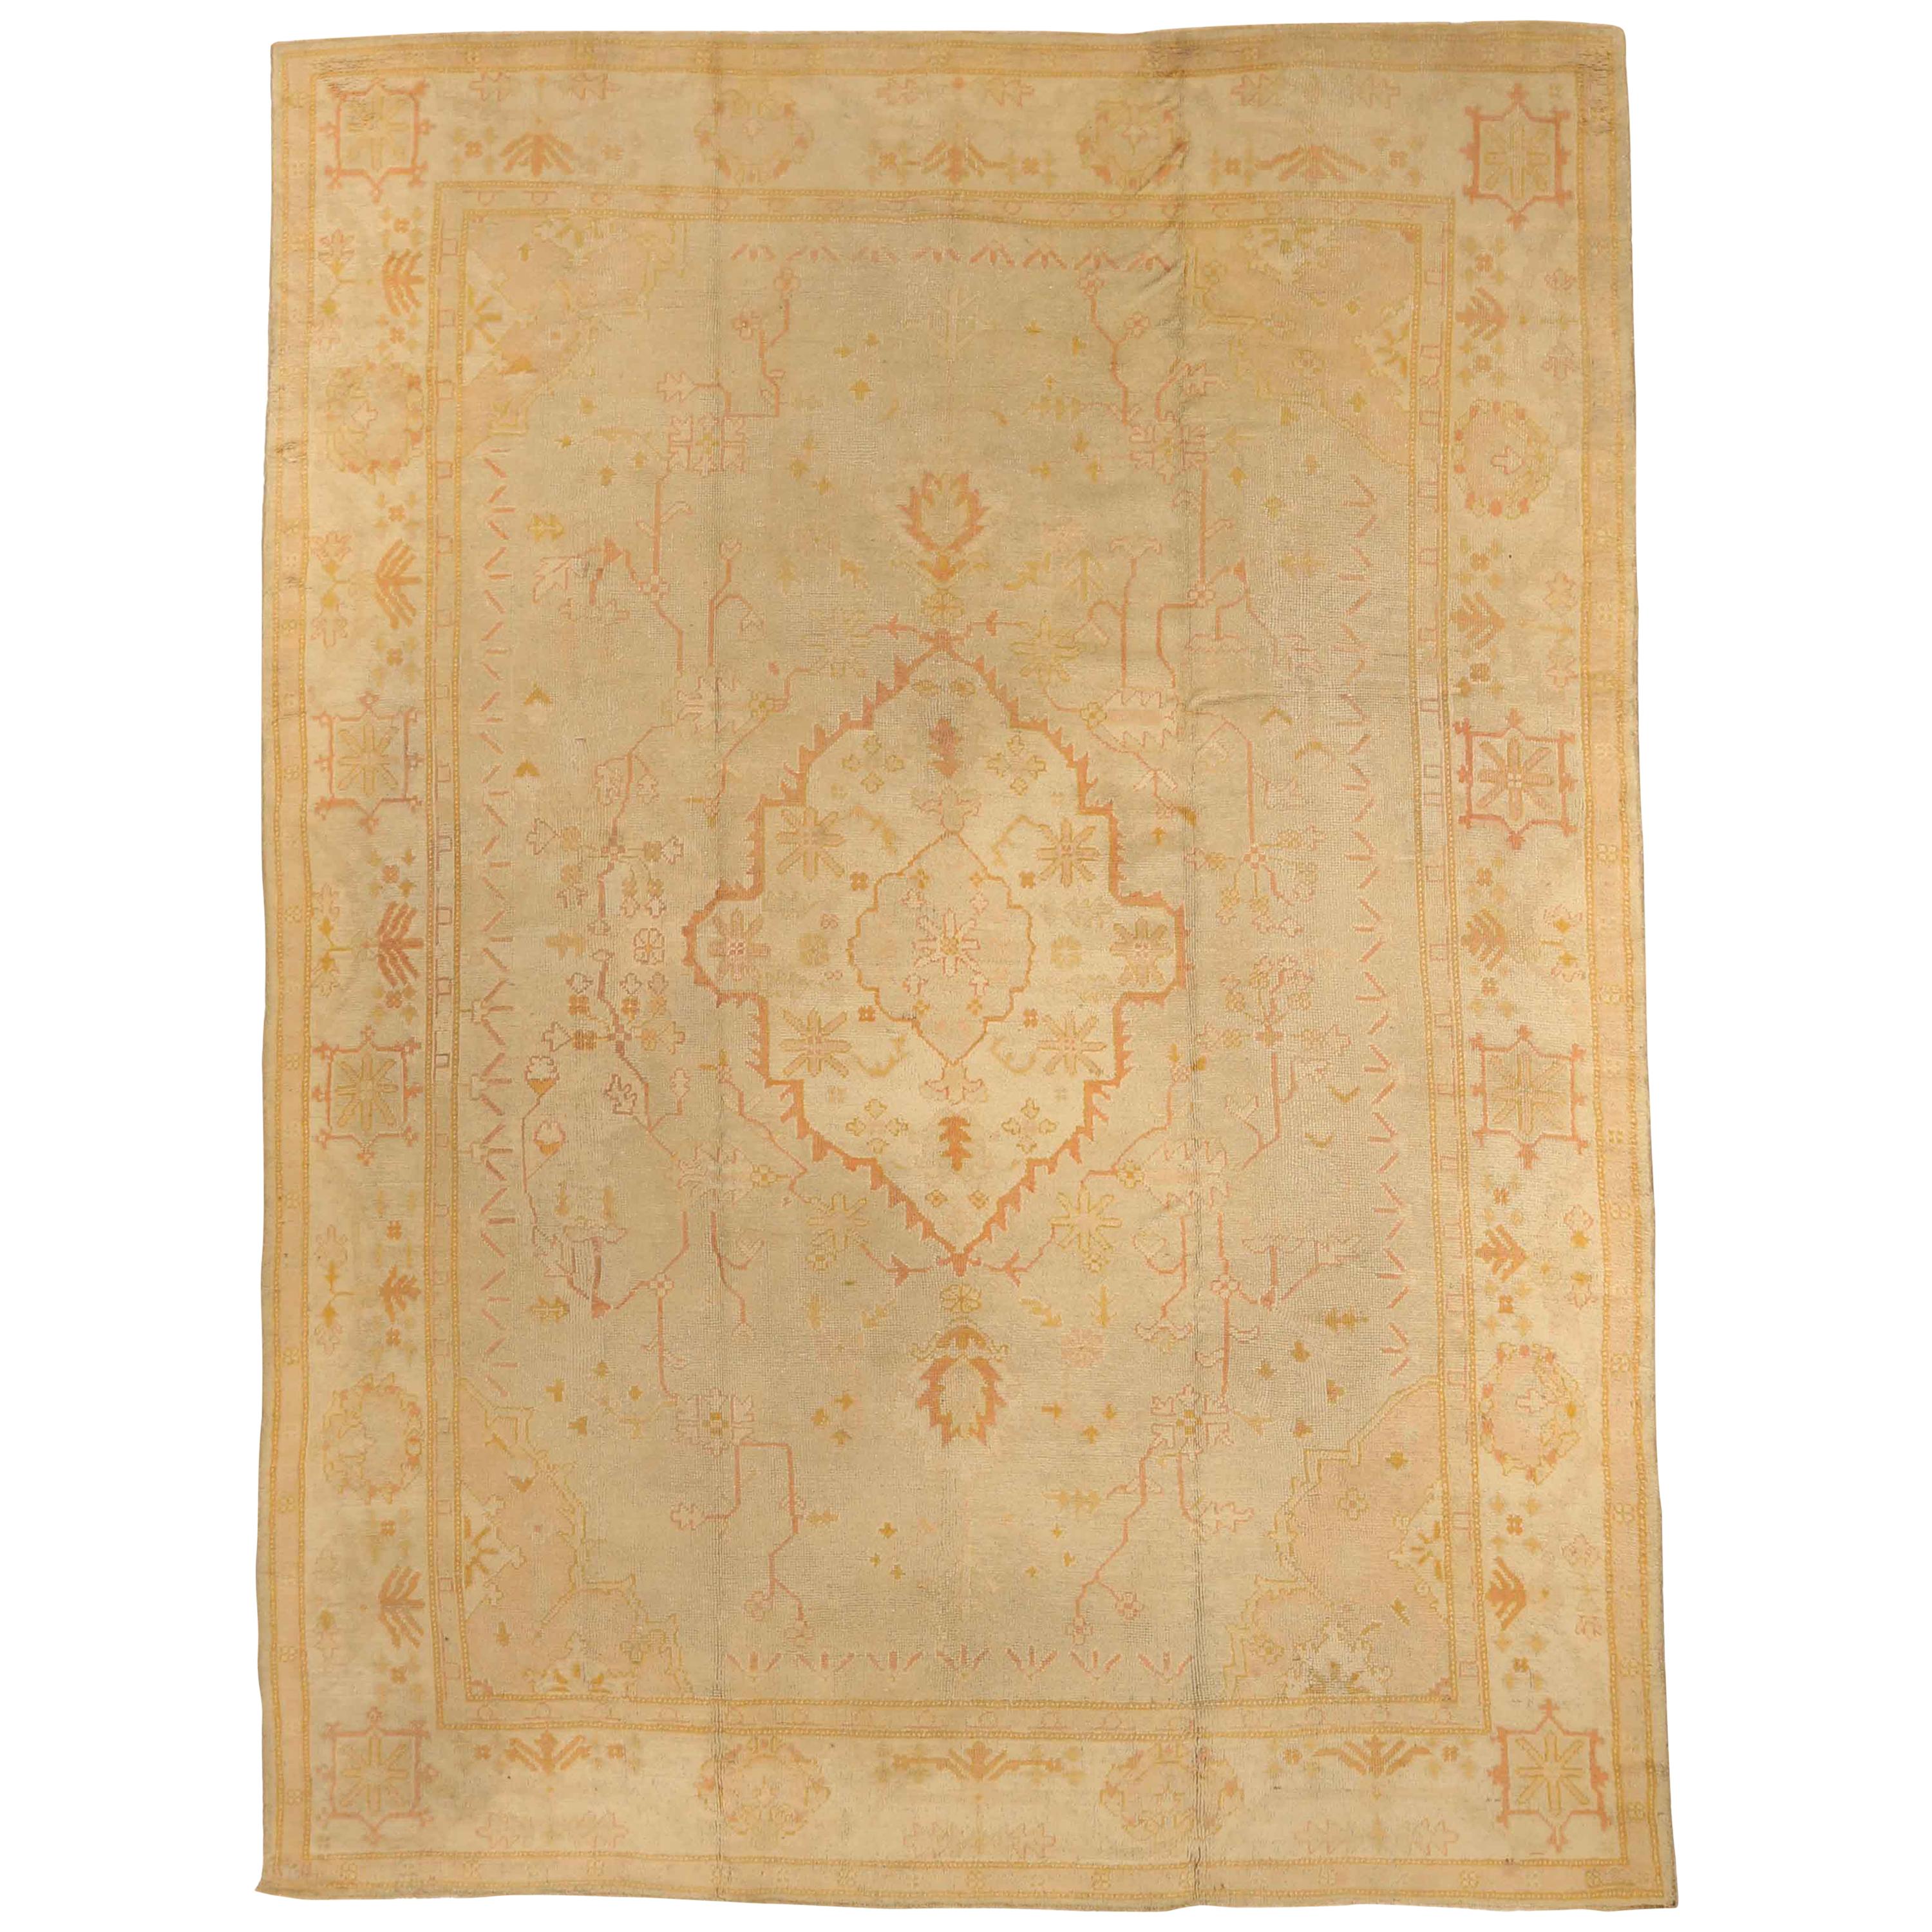 1910s Antique Persian Oushak Rug with Ivory and Beige Flower Field Design For Sale